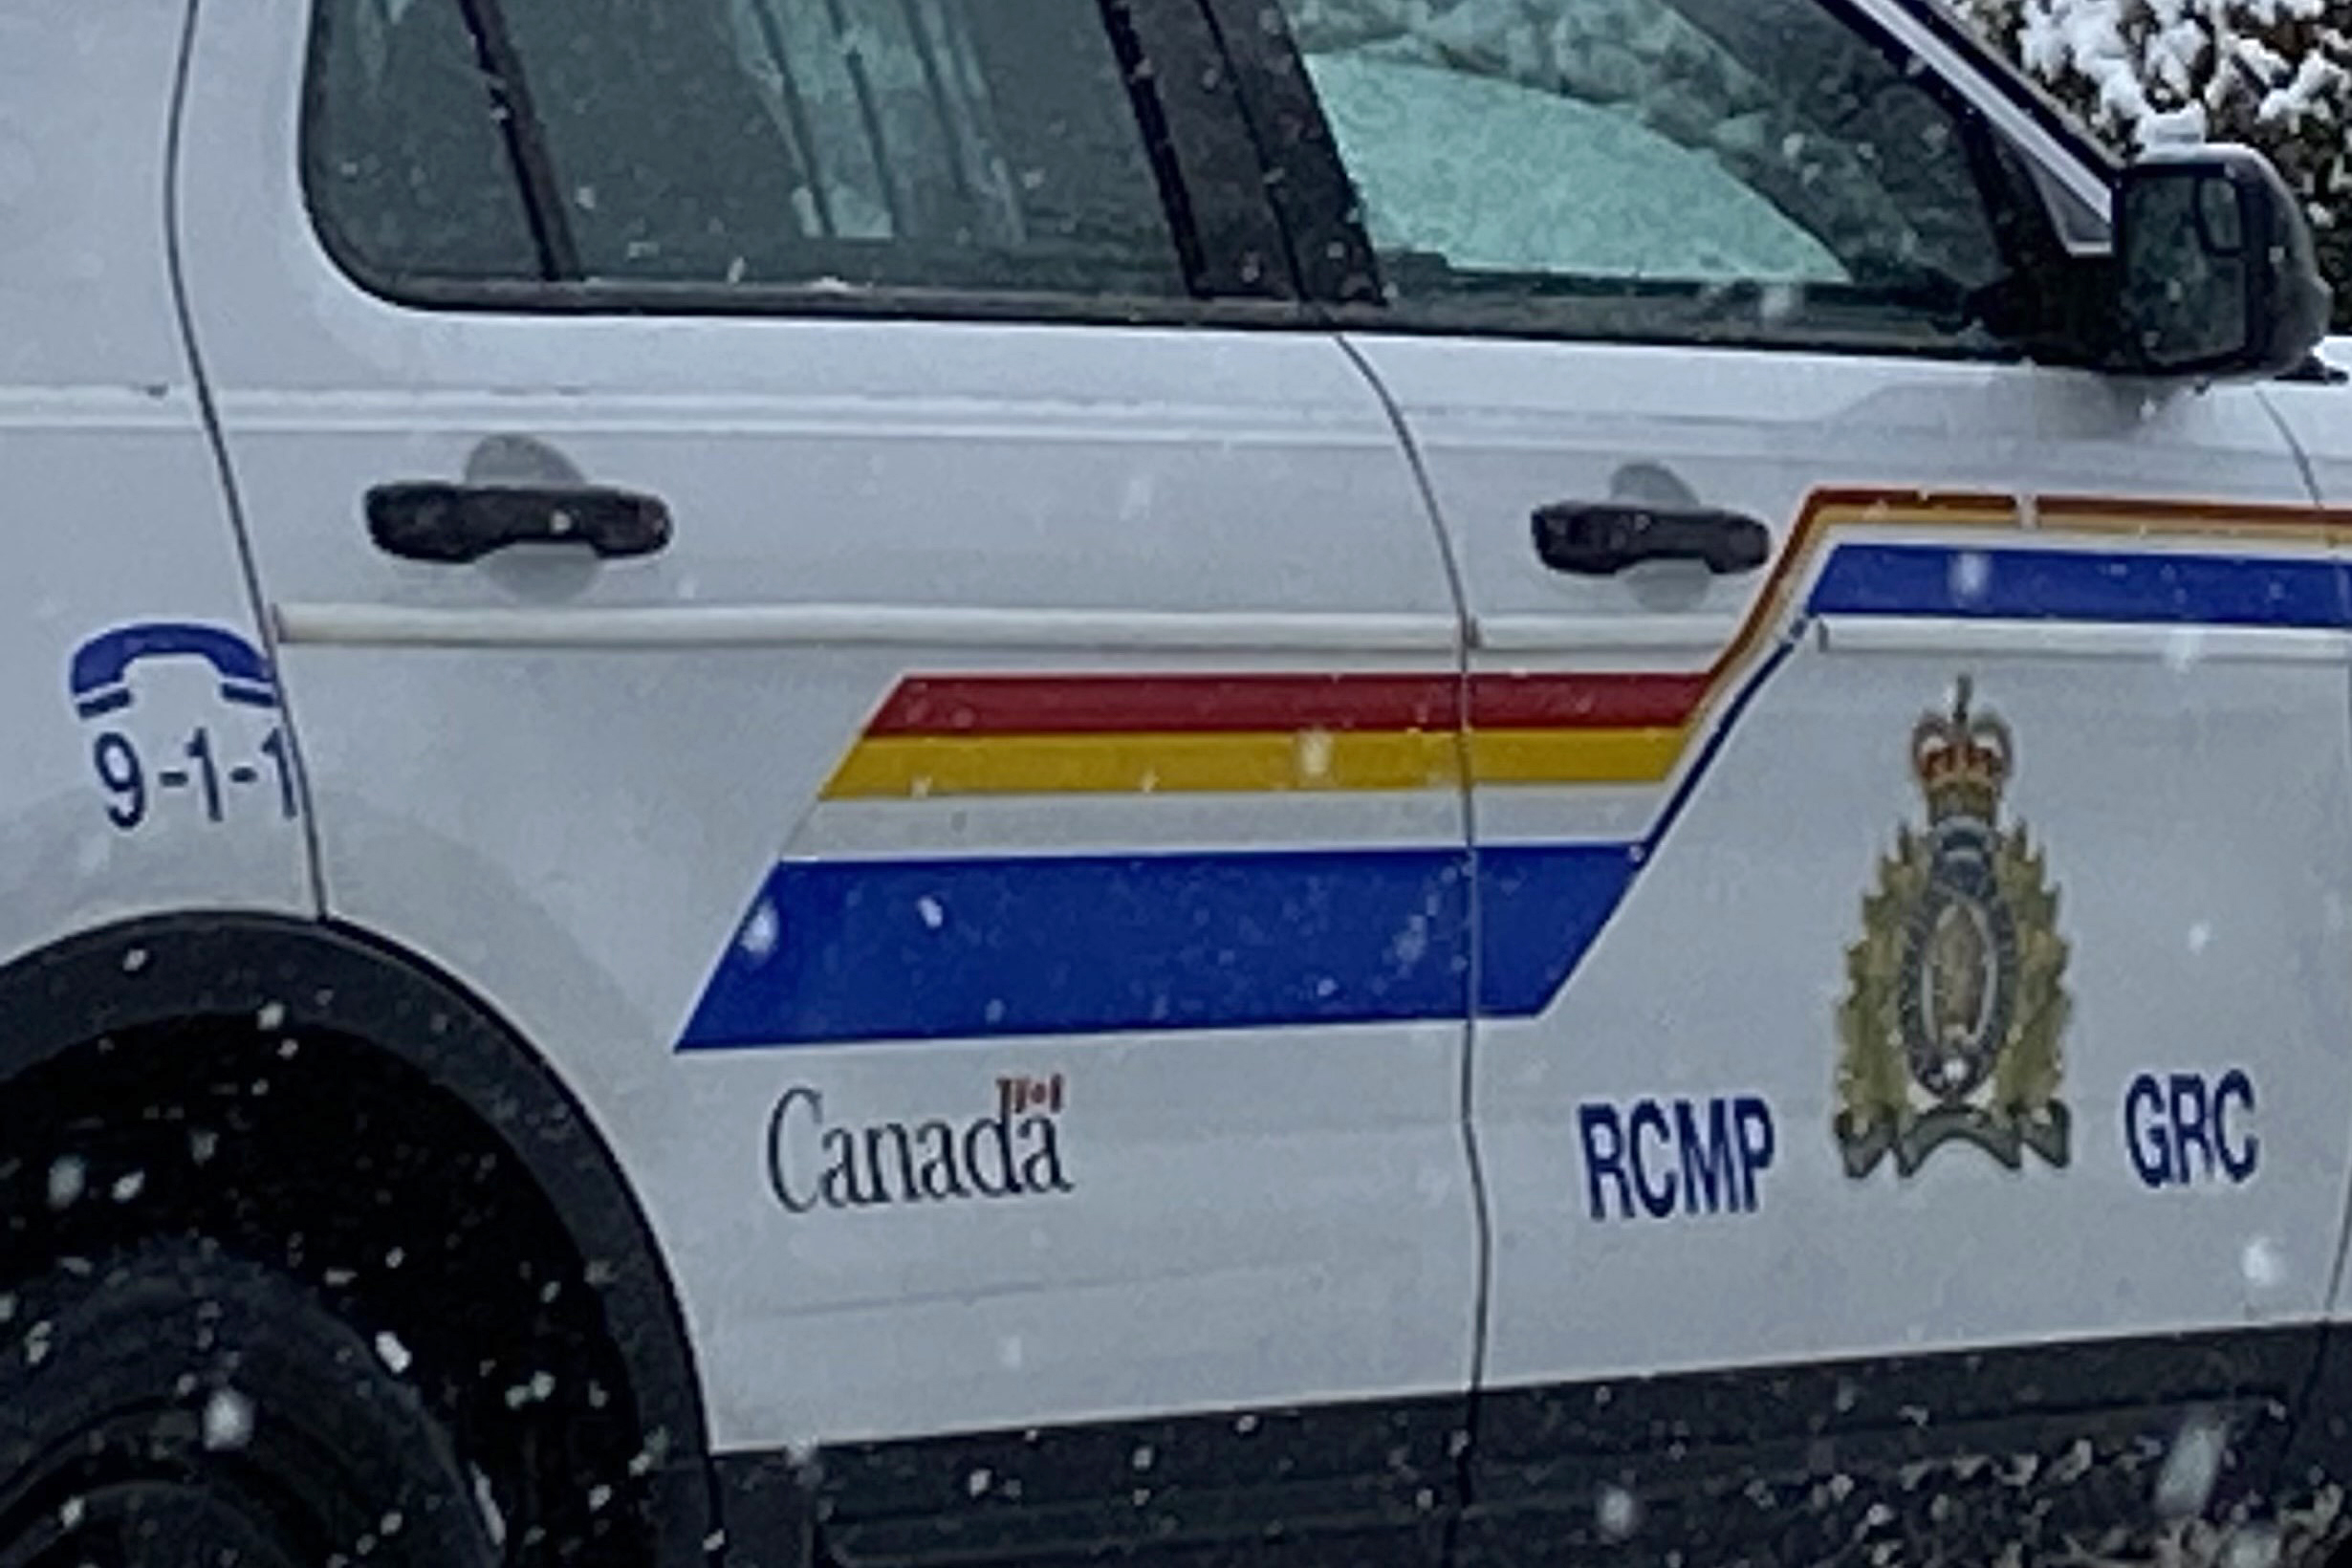 North Okanagan man surrenders peacefully after police called to residence